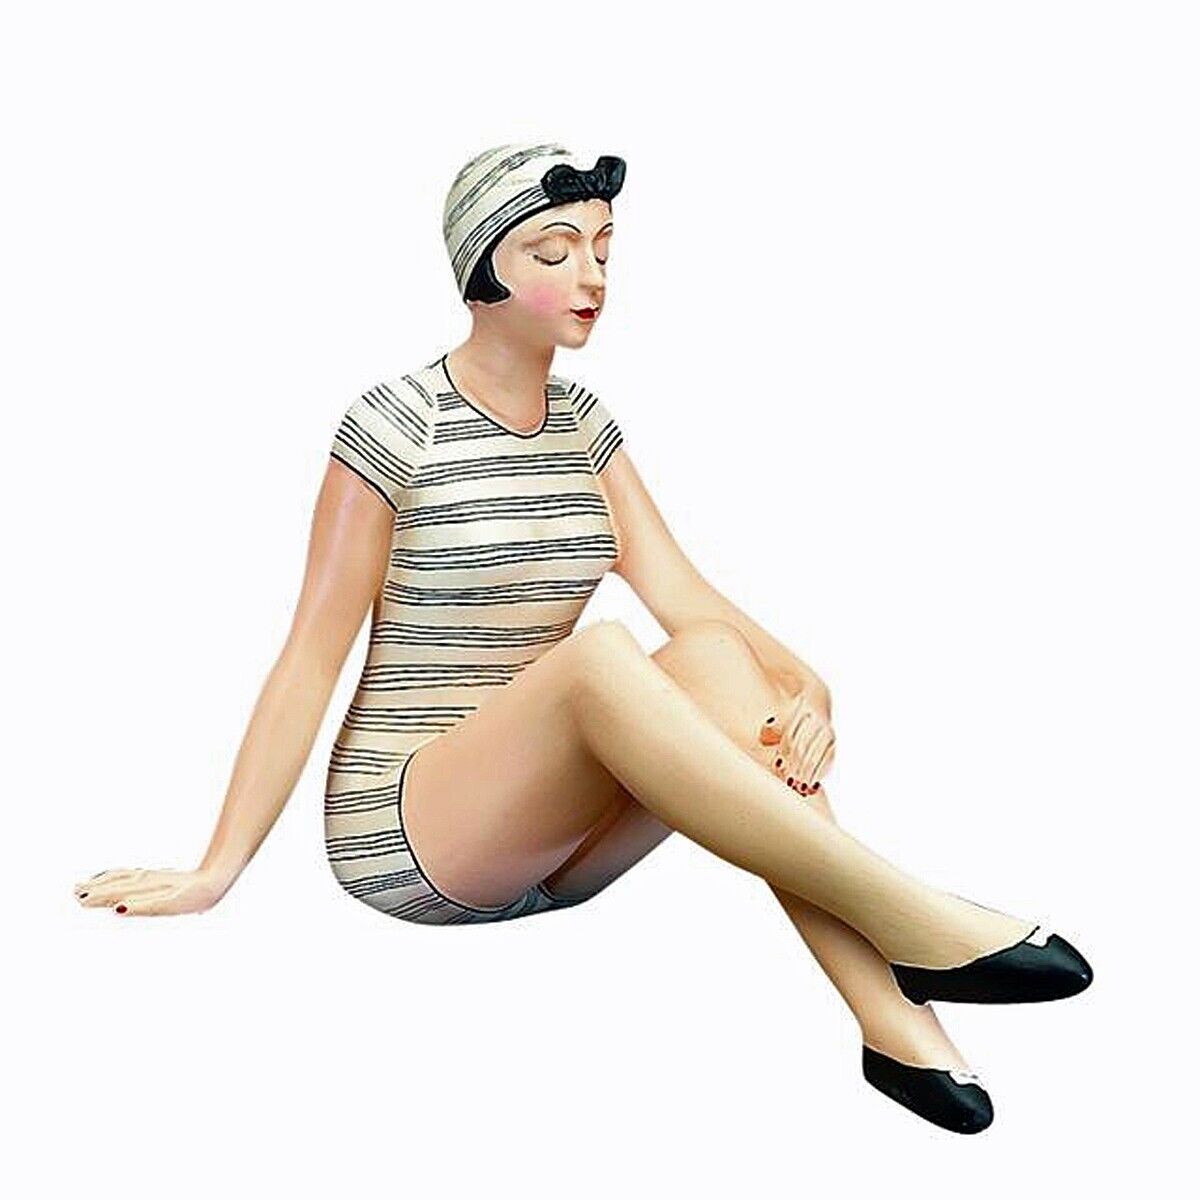 BATHING BEAUTY FIGURINE IN BLACK AND WHITE STRIPED SWIMSUIT & SWIM CAP